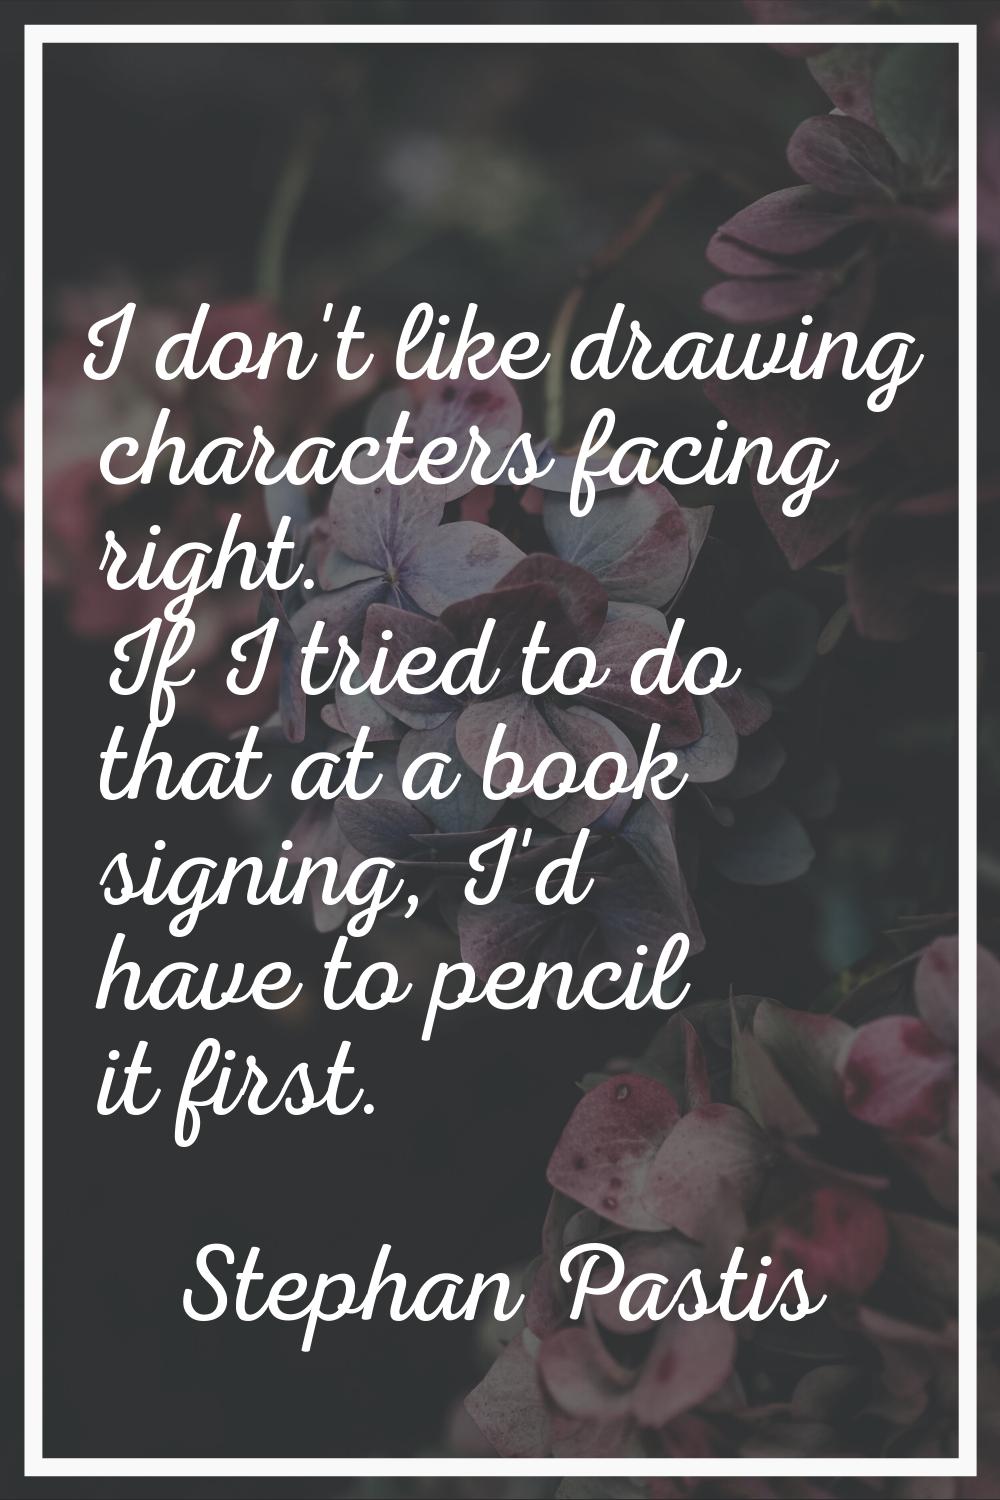 I don't like drawing characters facing right. If I tried to do that at a book signing, I'd have to 